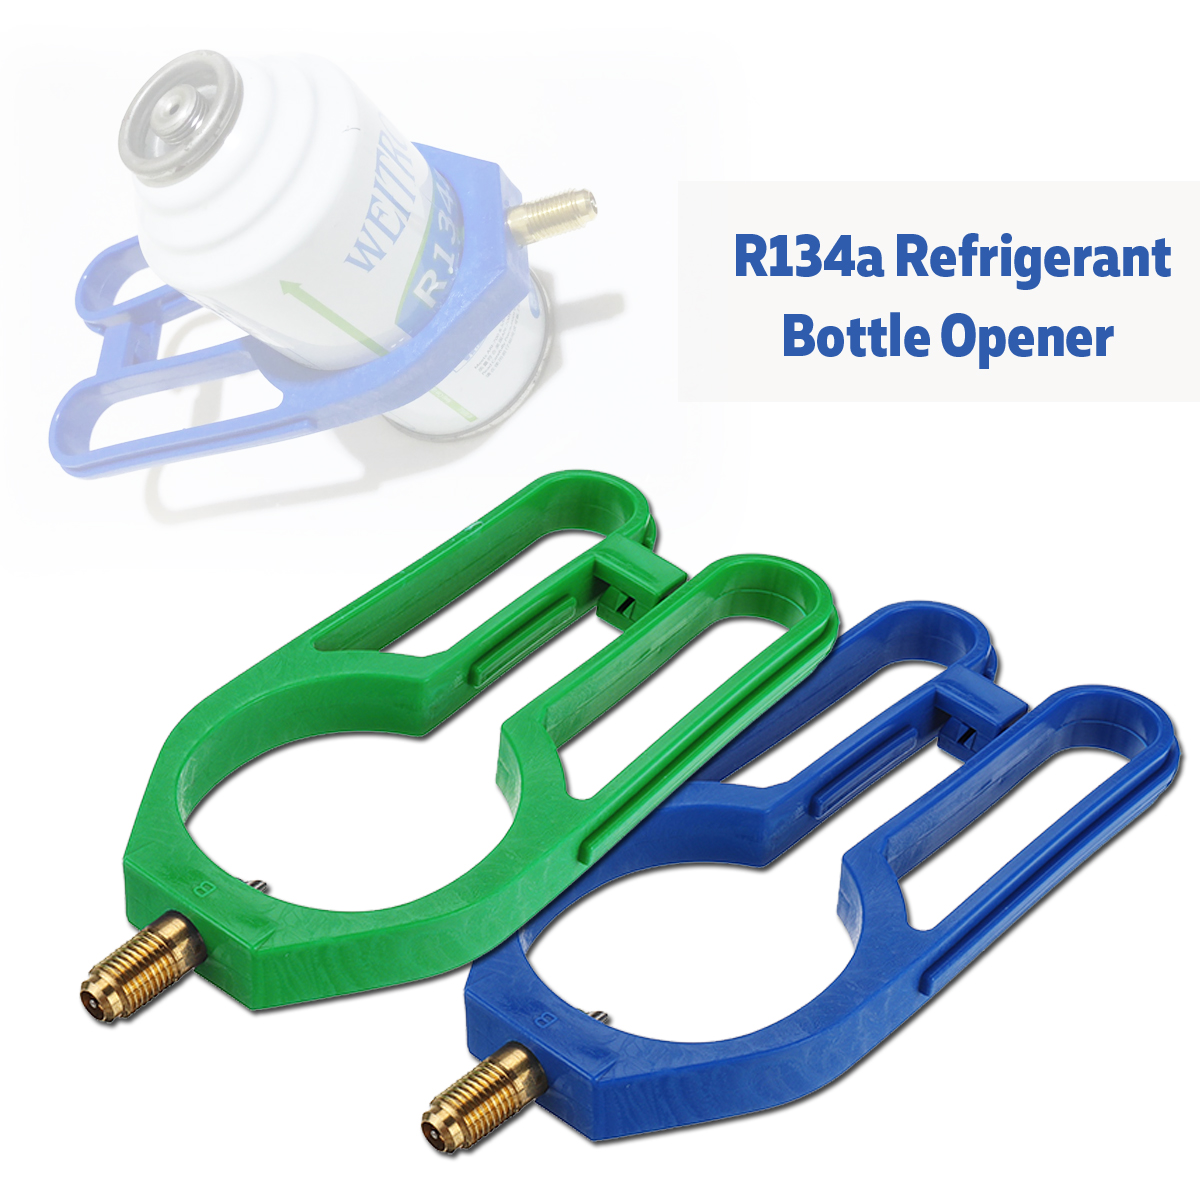 Universal-Car-Can-Air-Conditioning-Refrigerant-Bottle-Opener-Refrigeration-Open-Valve-for-R134A-1360405